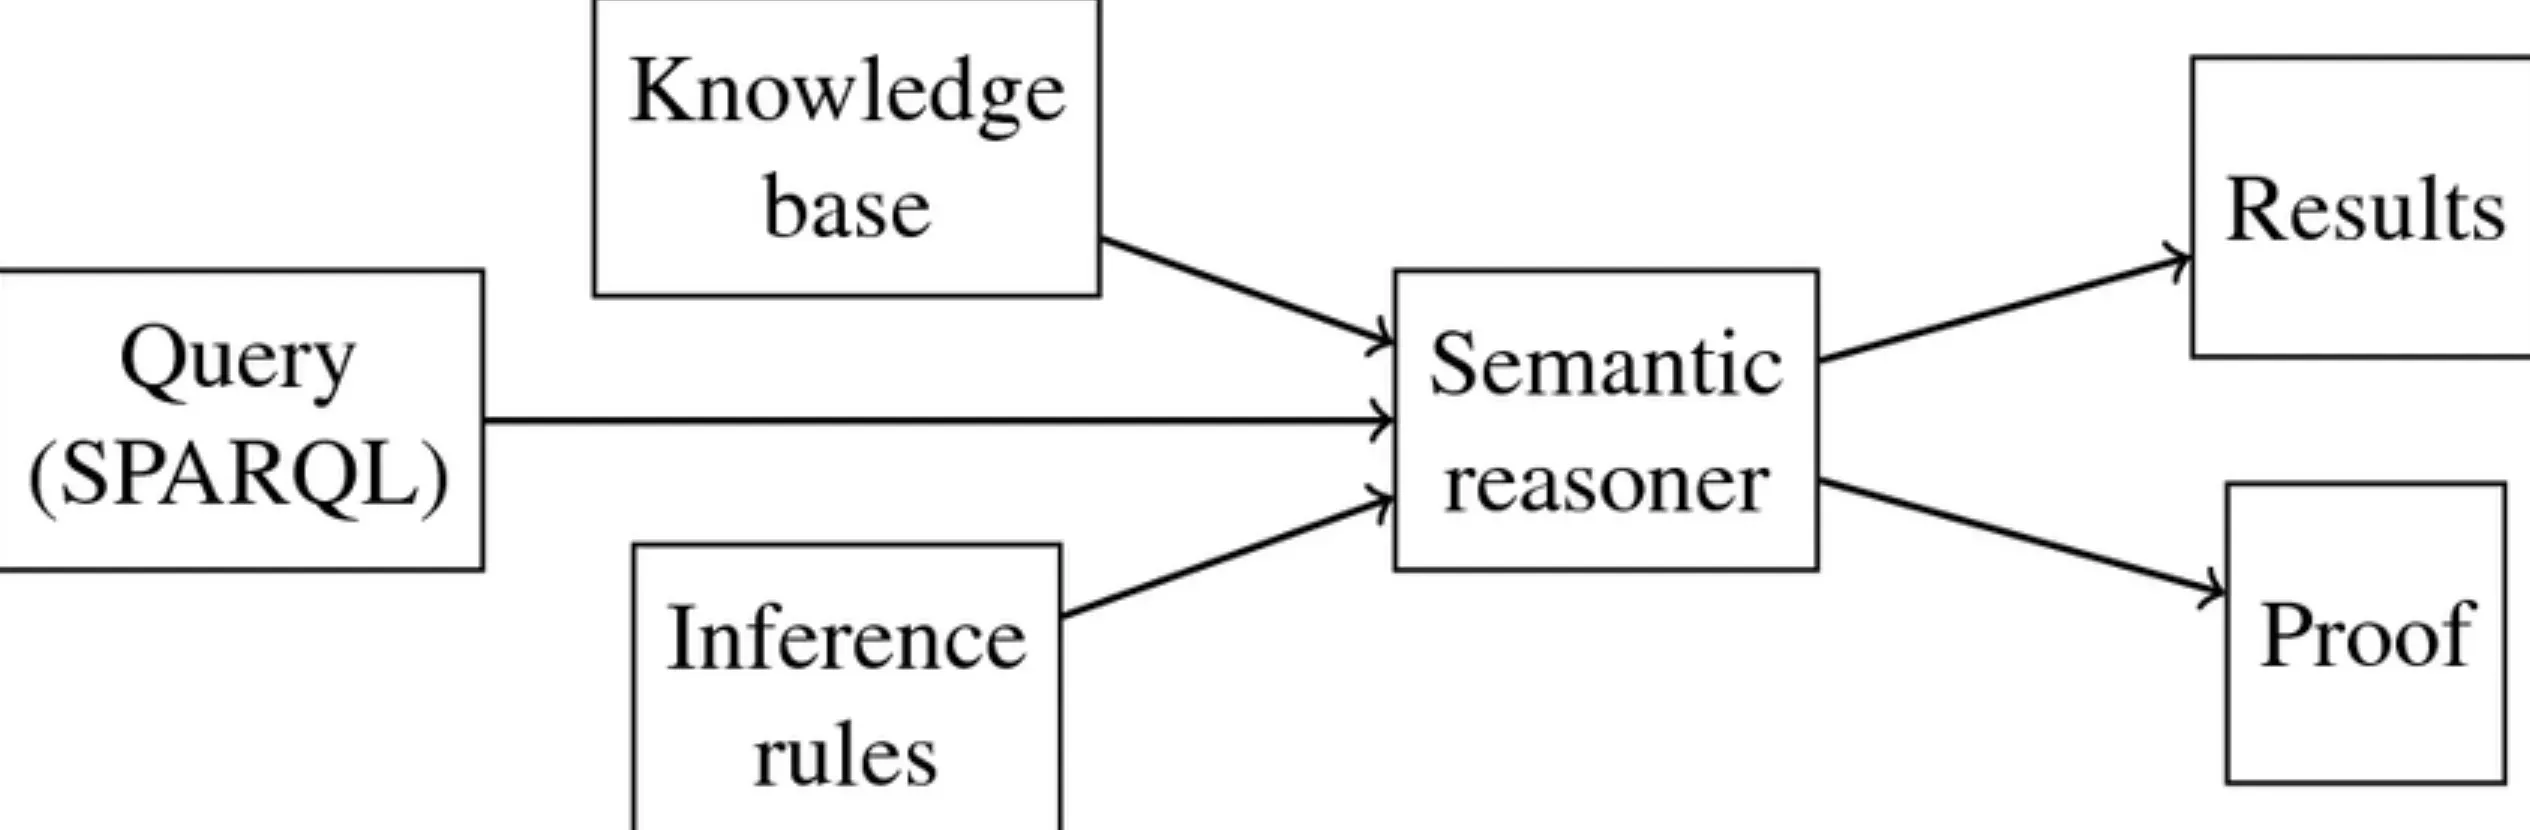 Why is a Semantic Reasoner important?